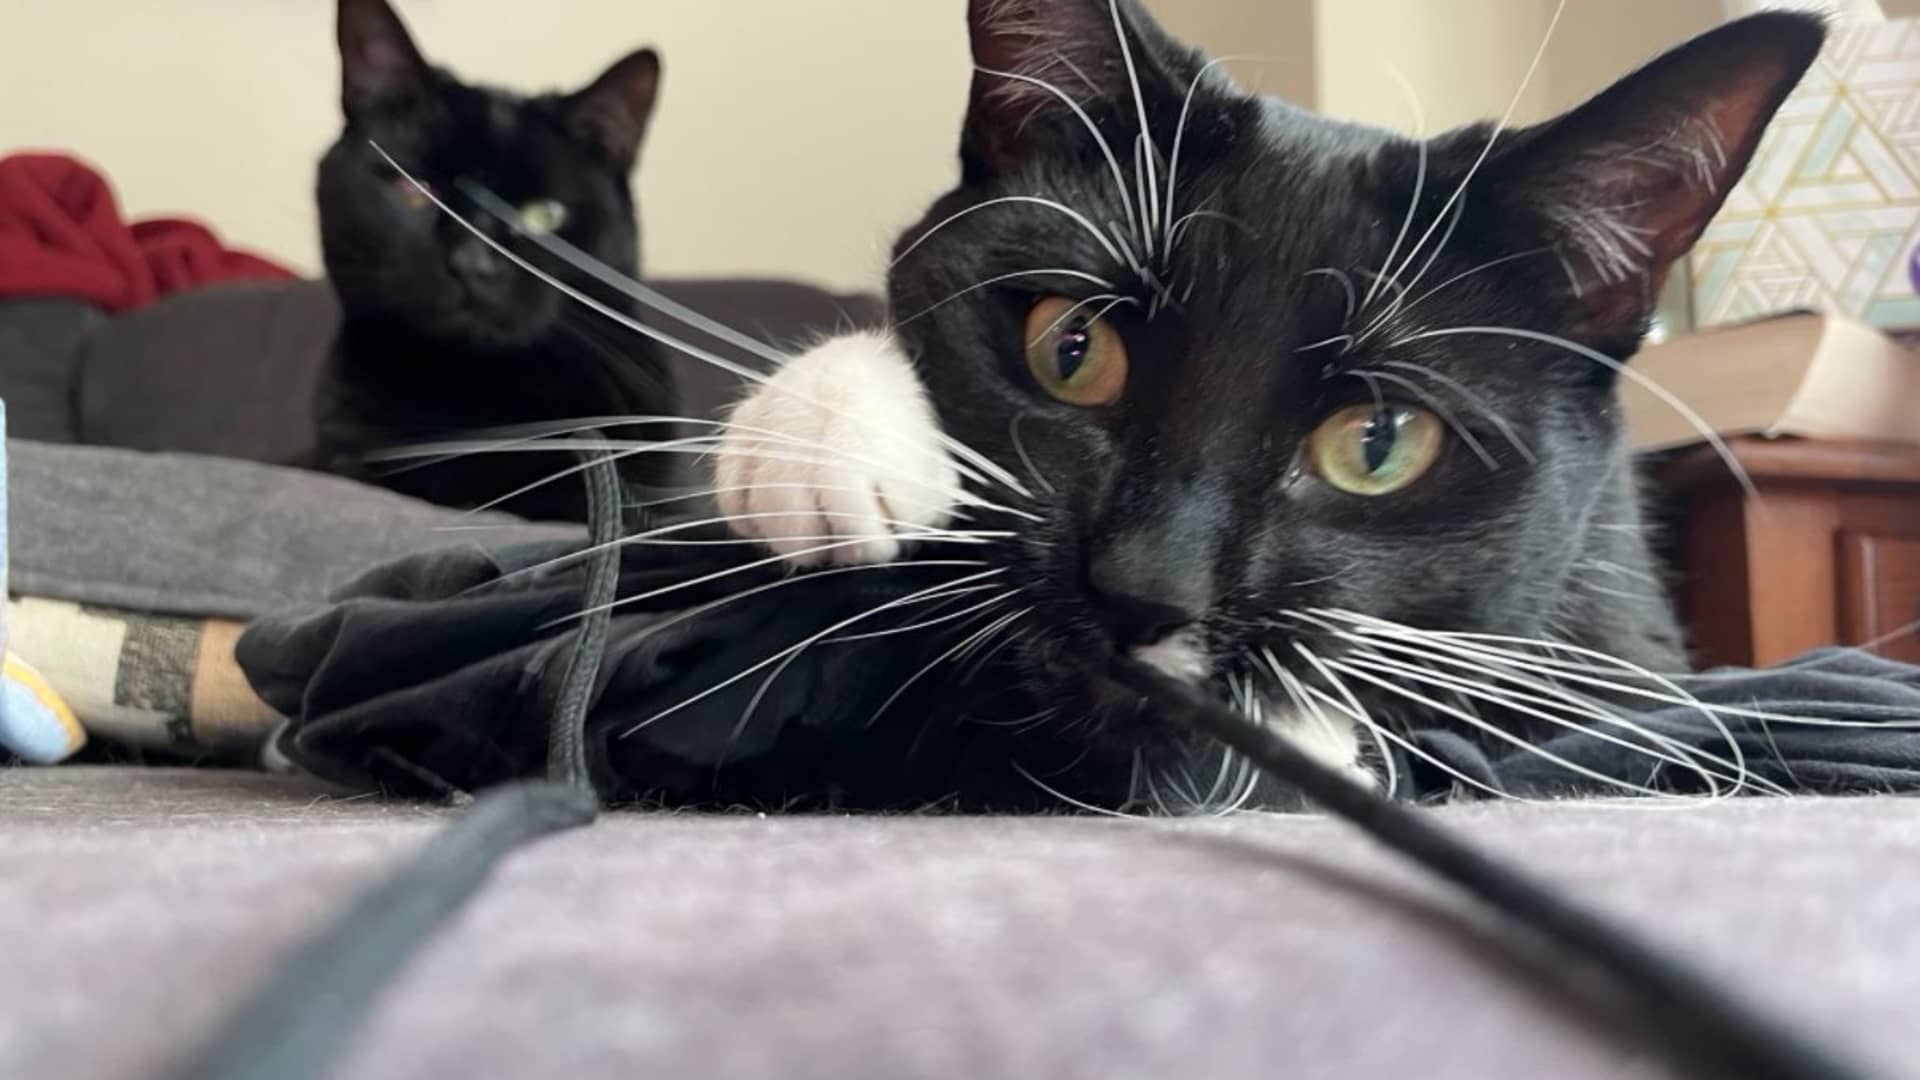 Evan Coleman, a software engineer, said his internet-connected cat litter box was taken offline by the AWS outage. Luckily, his cats Leo (left) and Luna (right) didn't starve.